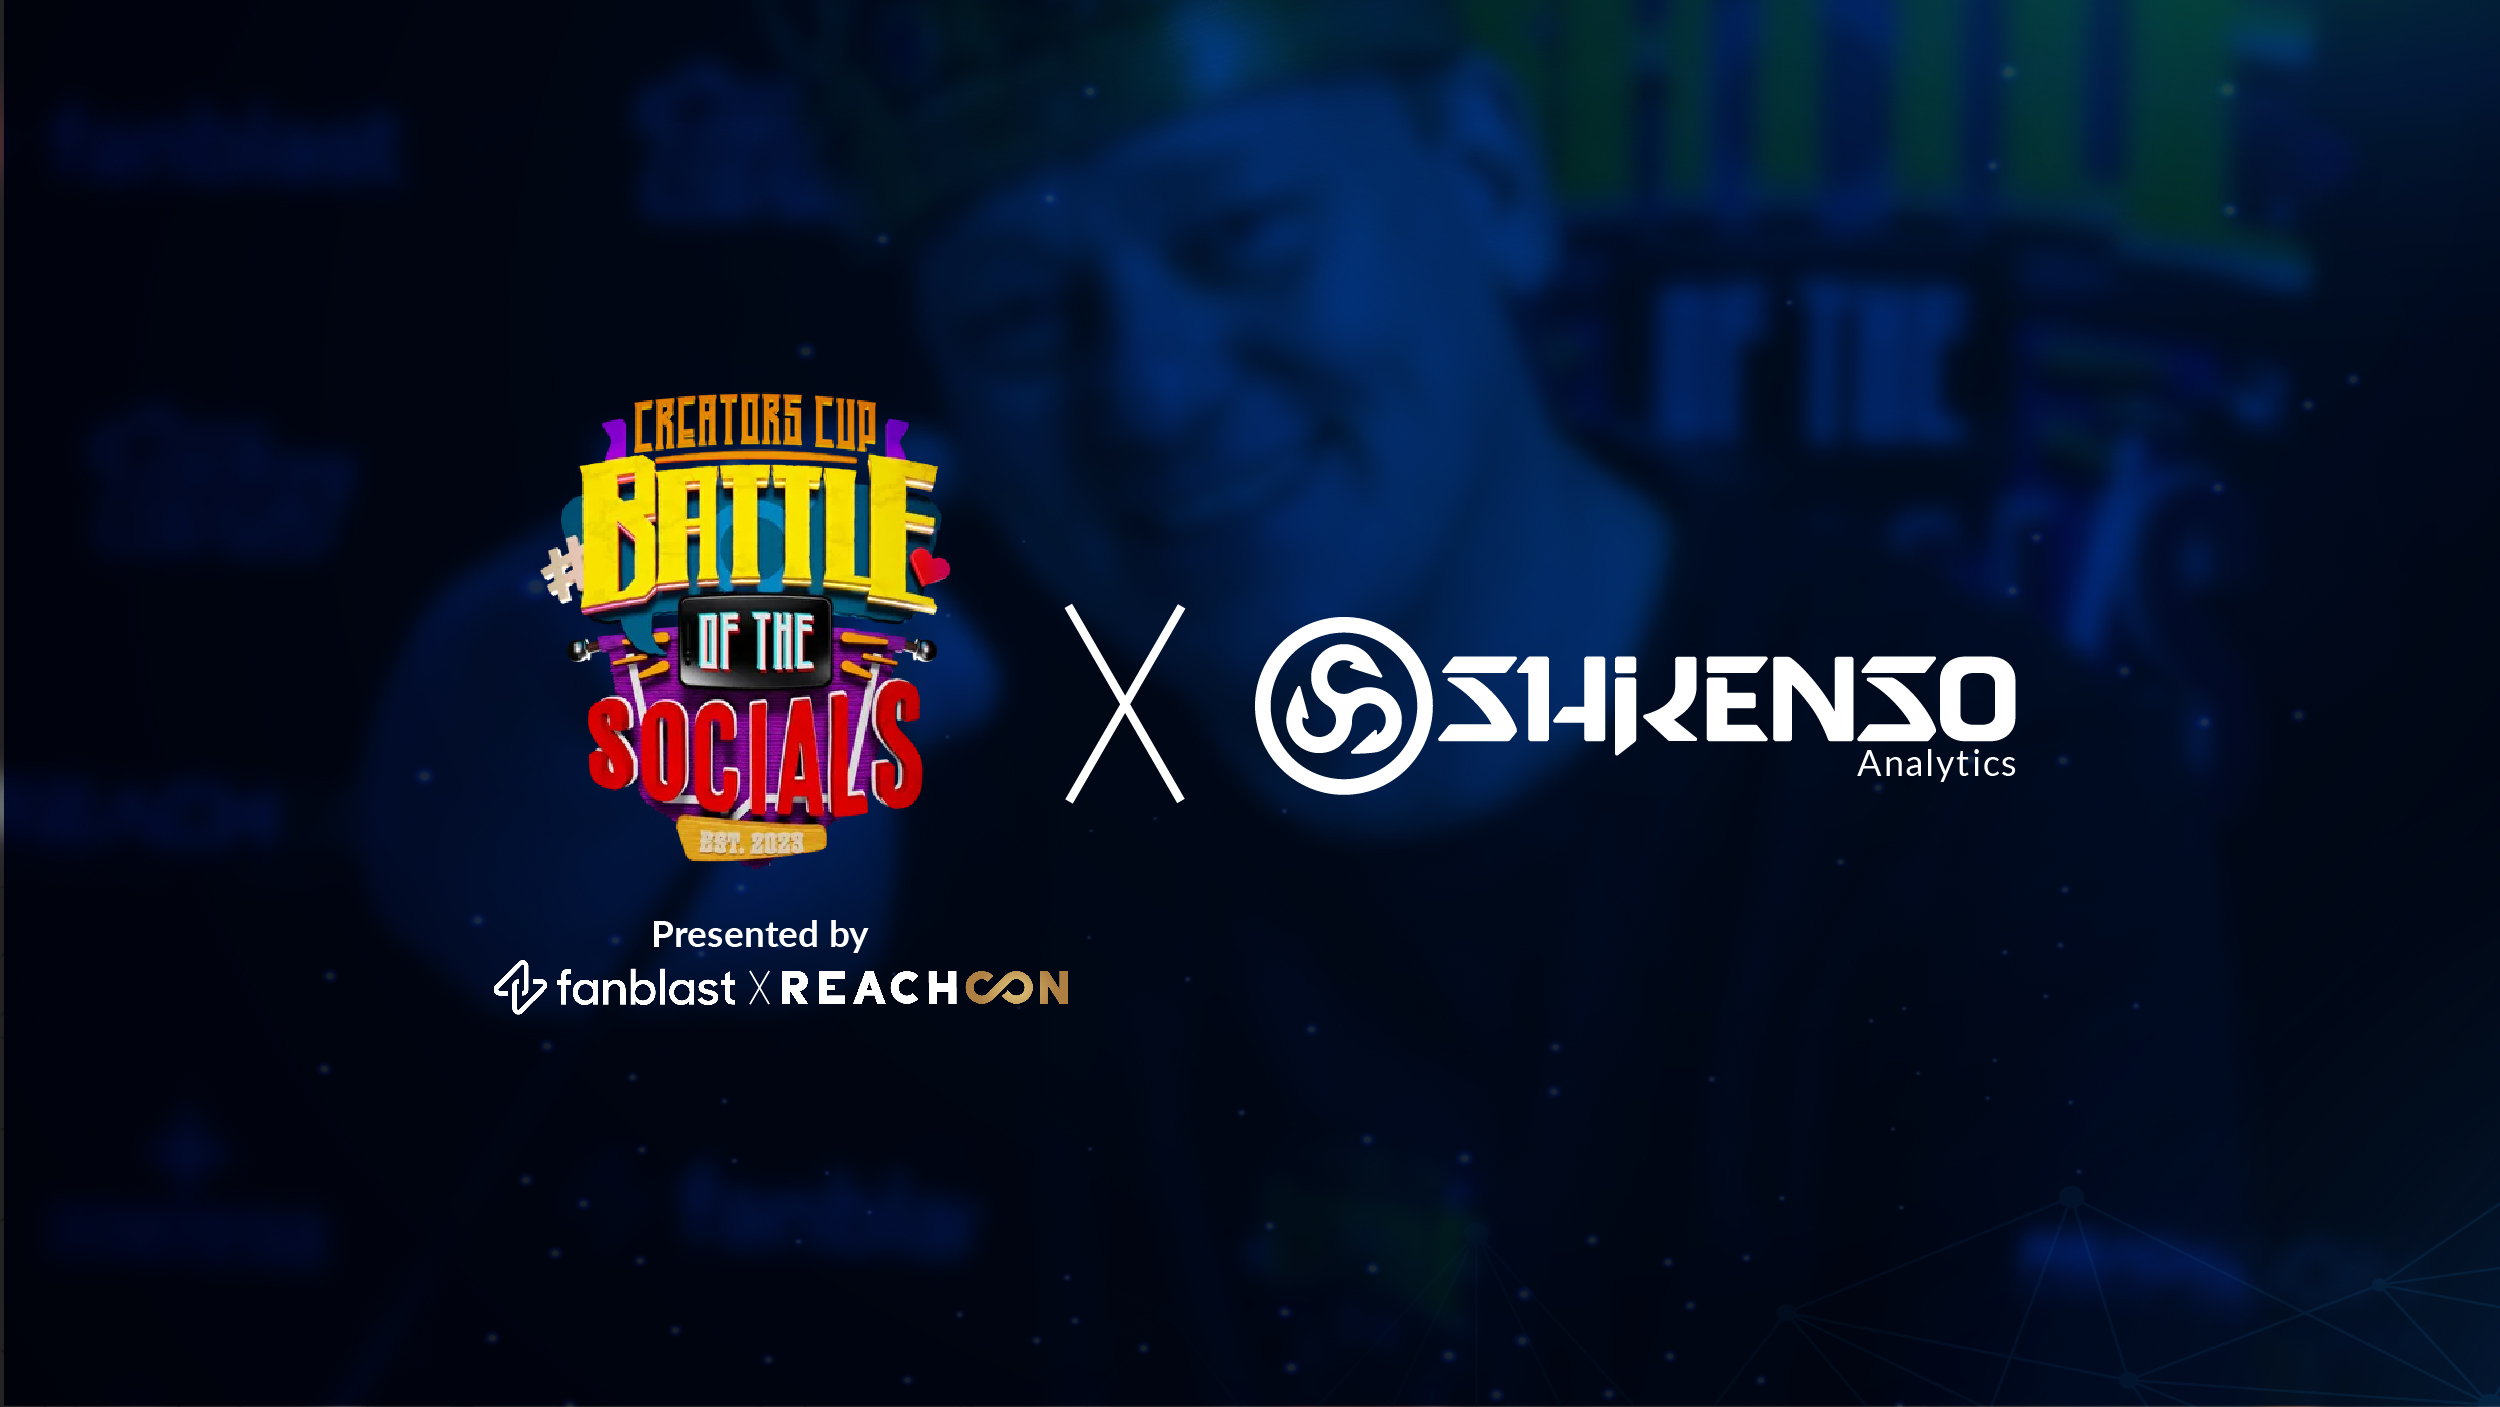 Fanblast and Rechcon partner with Shikenso Analytics for the Creators Cup Battle of the Socials